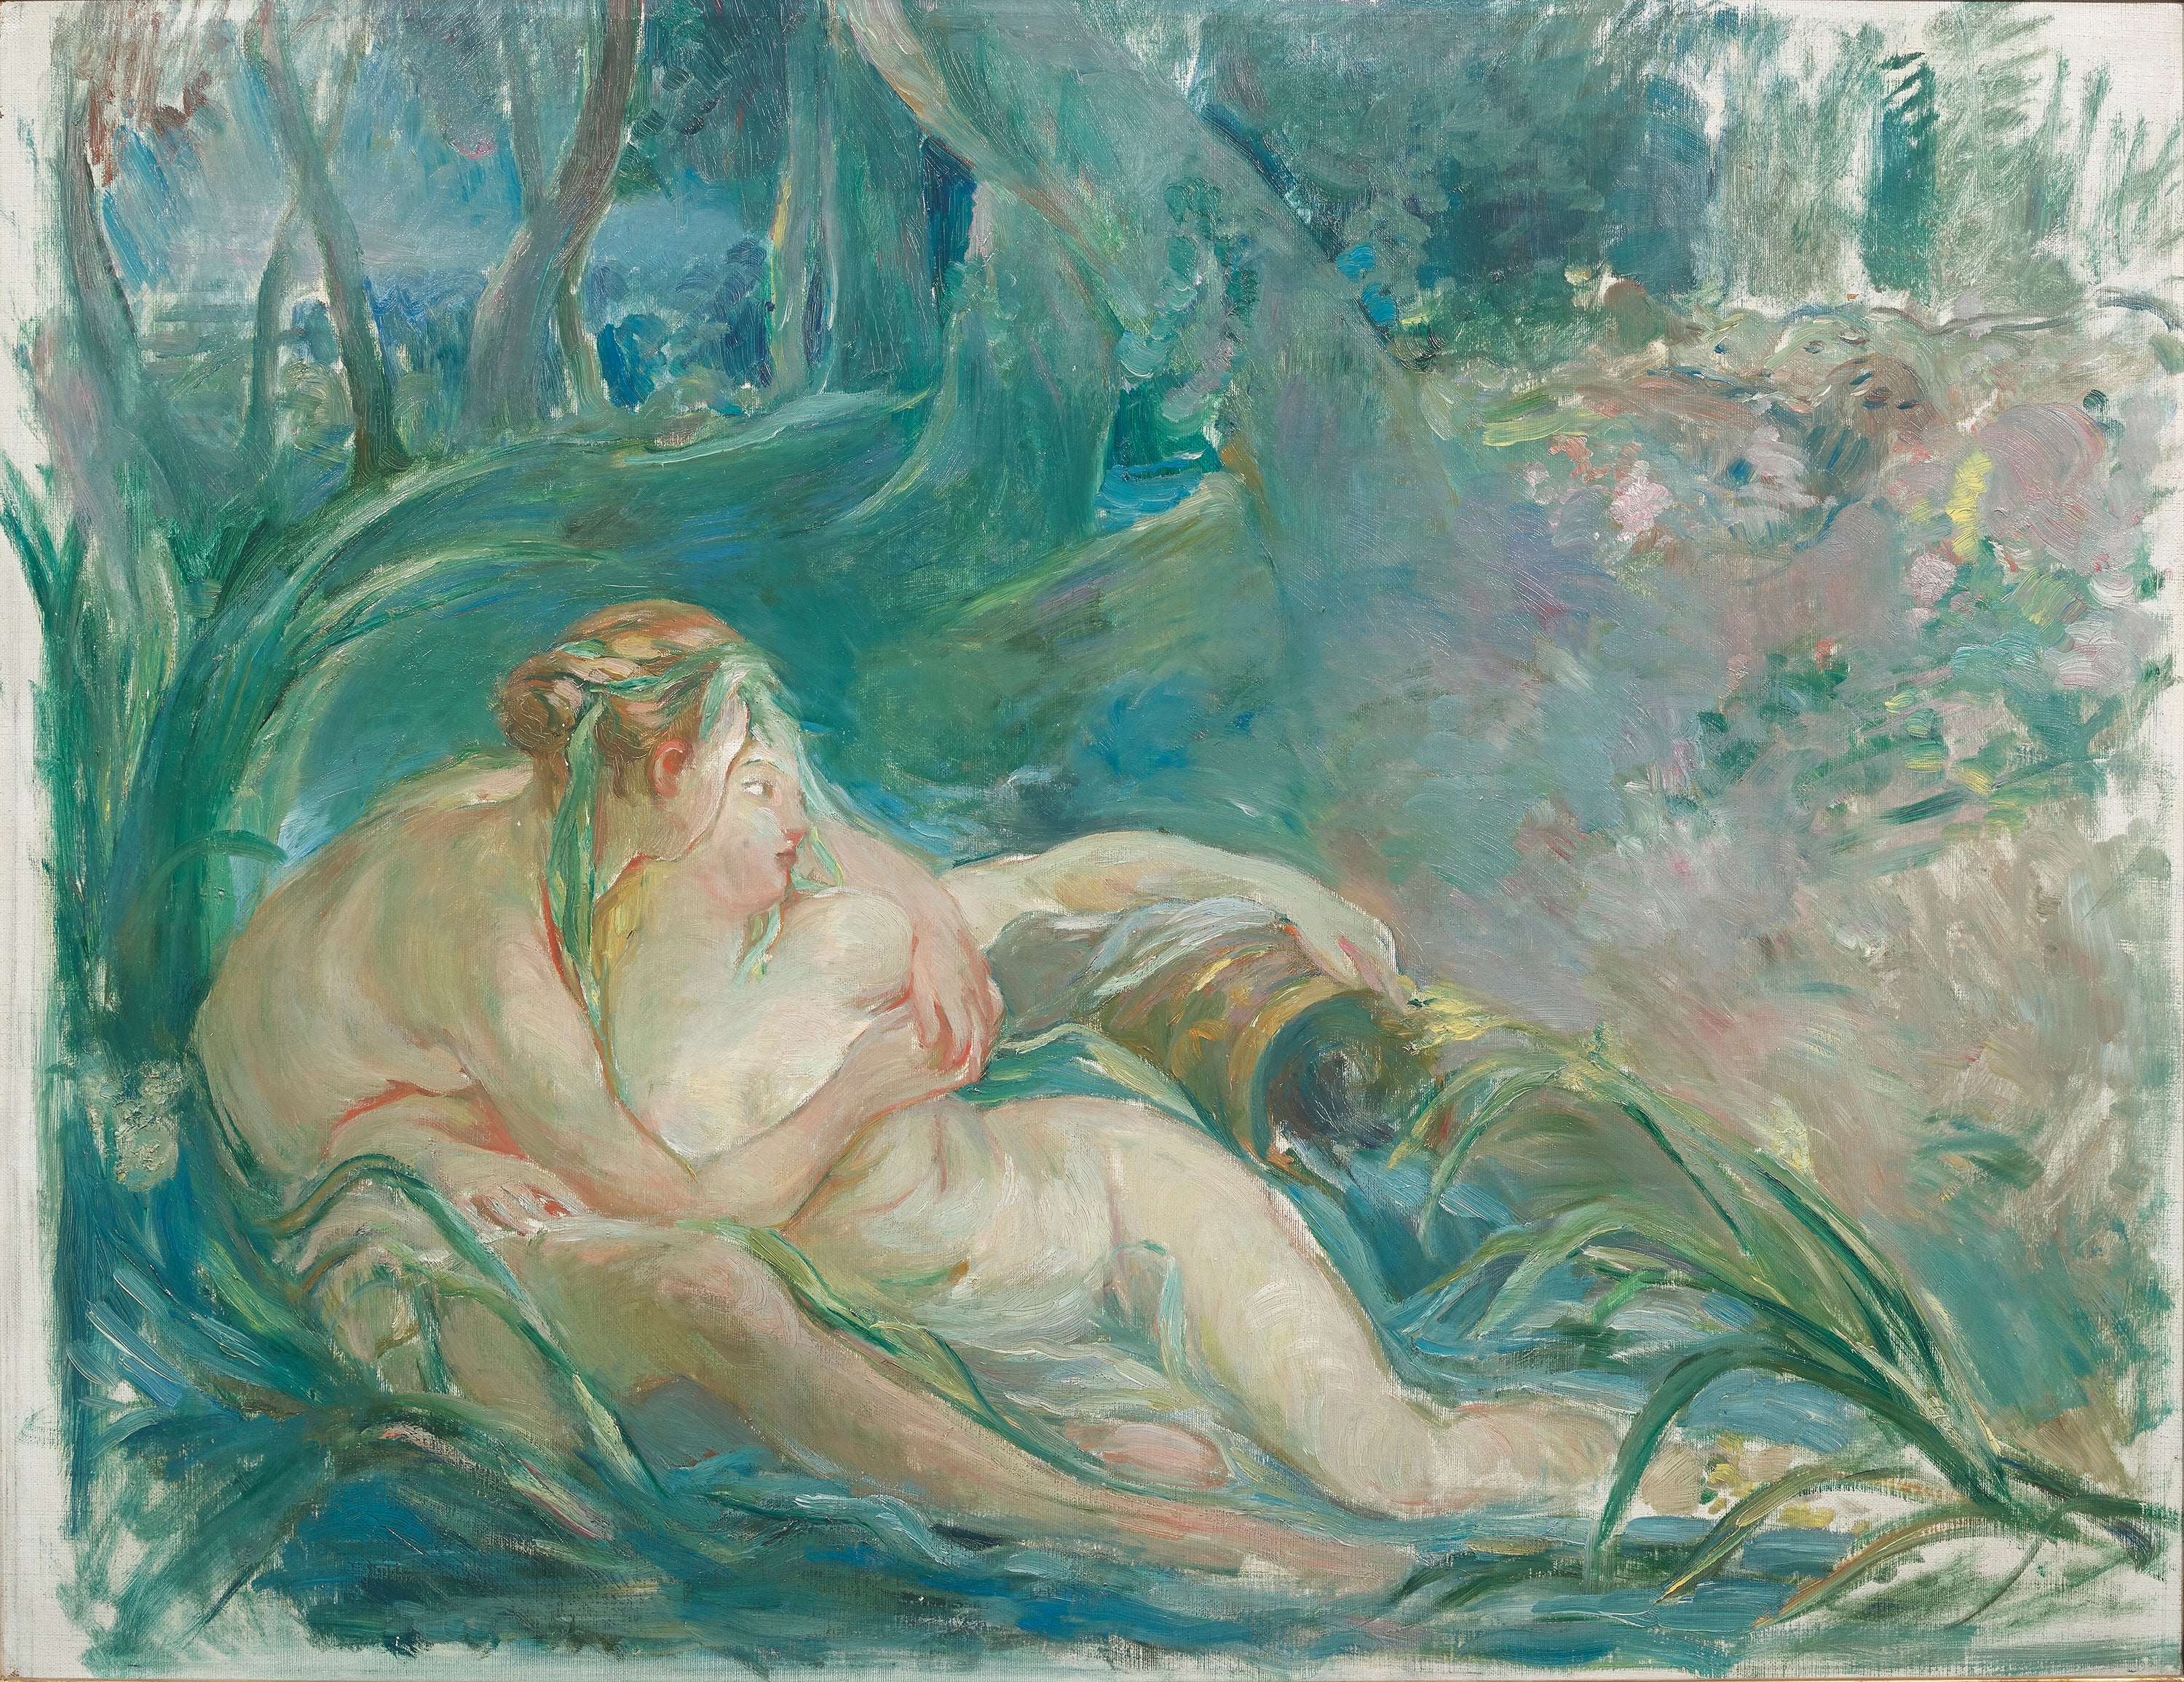 Two nymphs from ‘Apollo Revealing His Divinity to the Sheperdess Issé, after François Boucher’ by Morisot, 1892